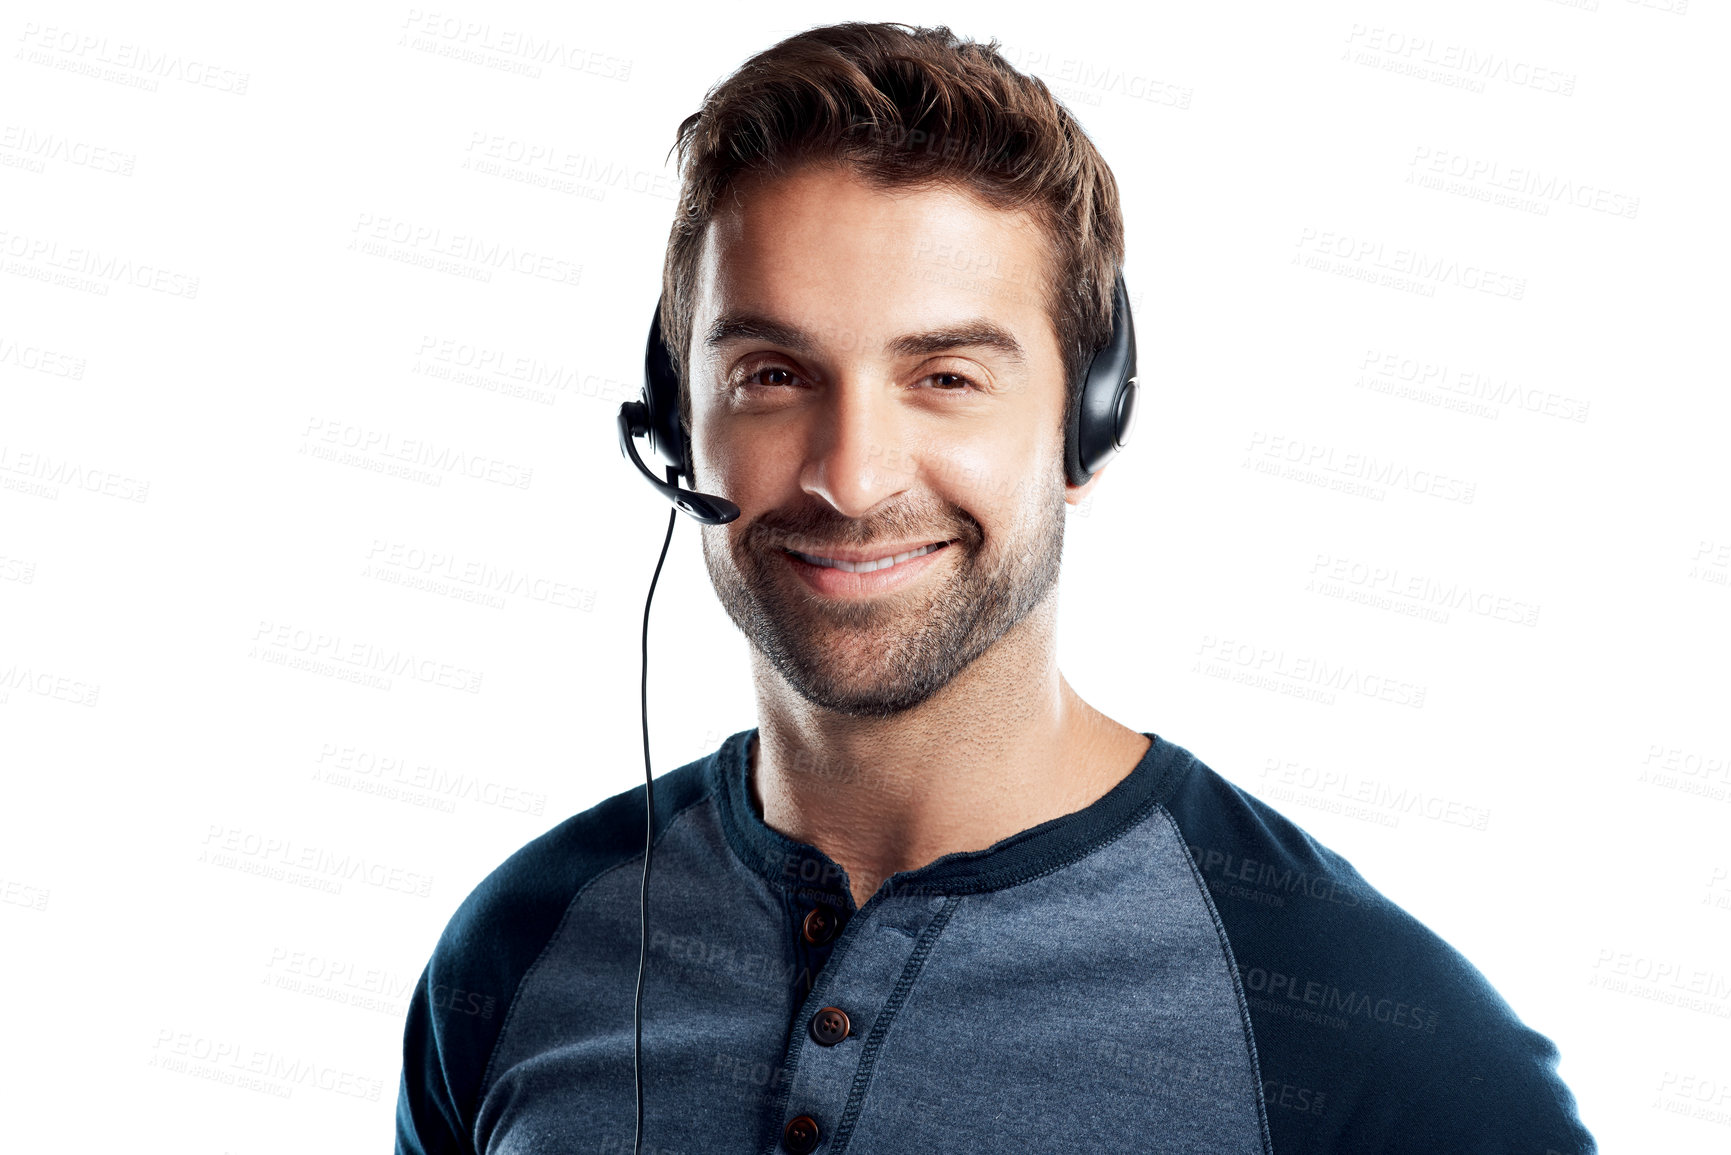 Buy stock photo Studio portrait of a handsome young man using a headset against a white background